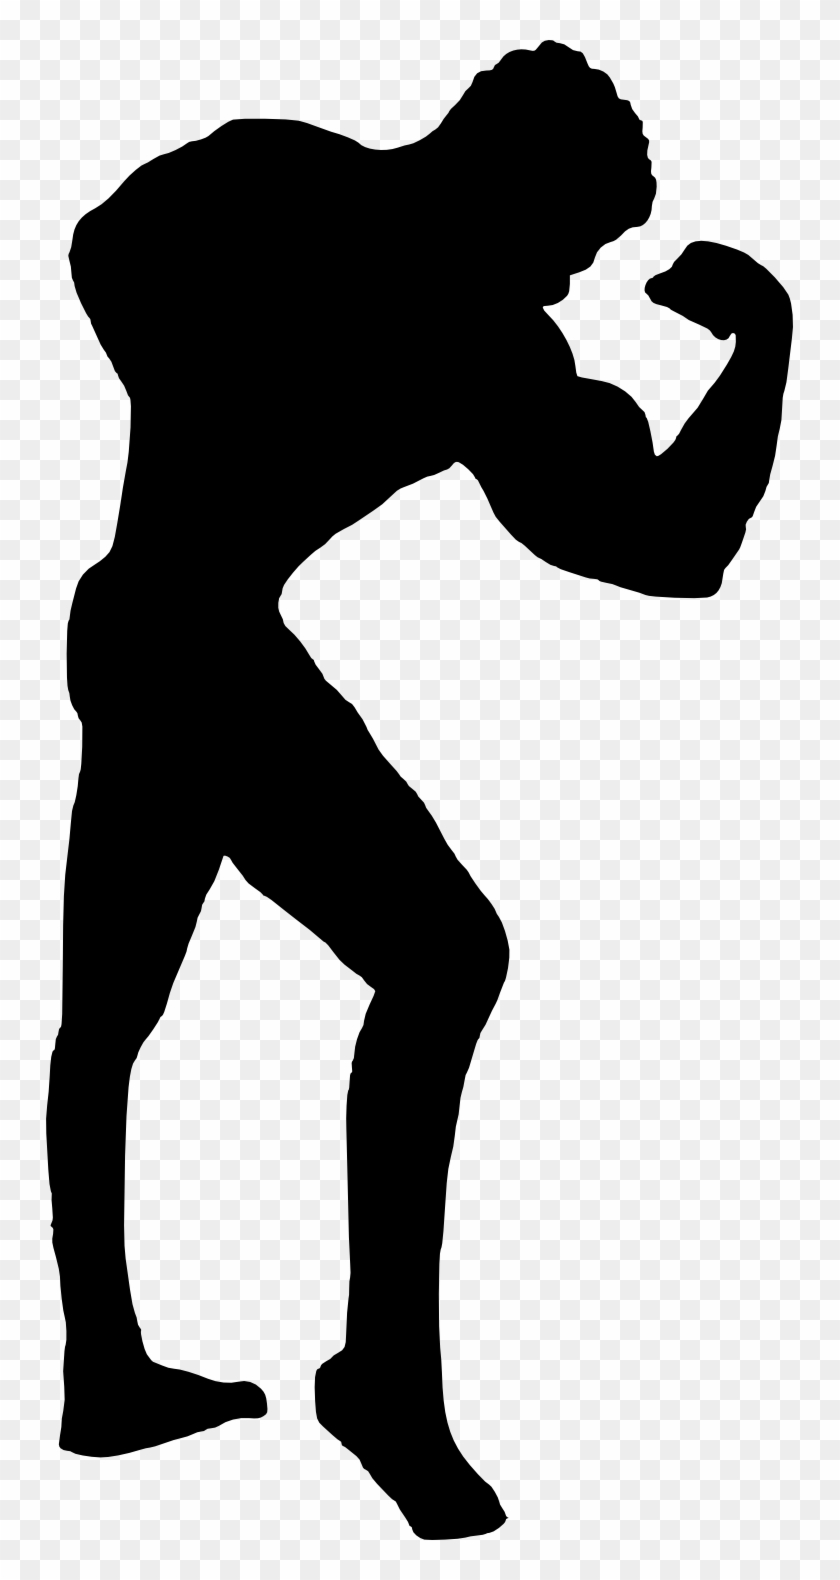 Free Download - Muscle Man Silhouette Png #876845